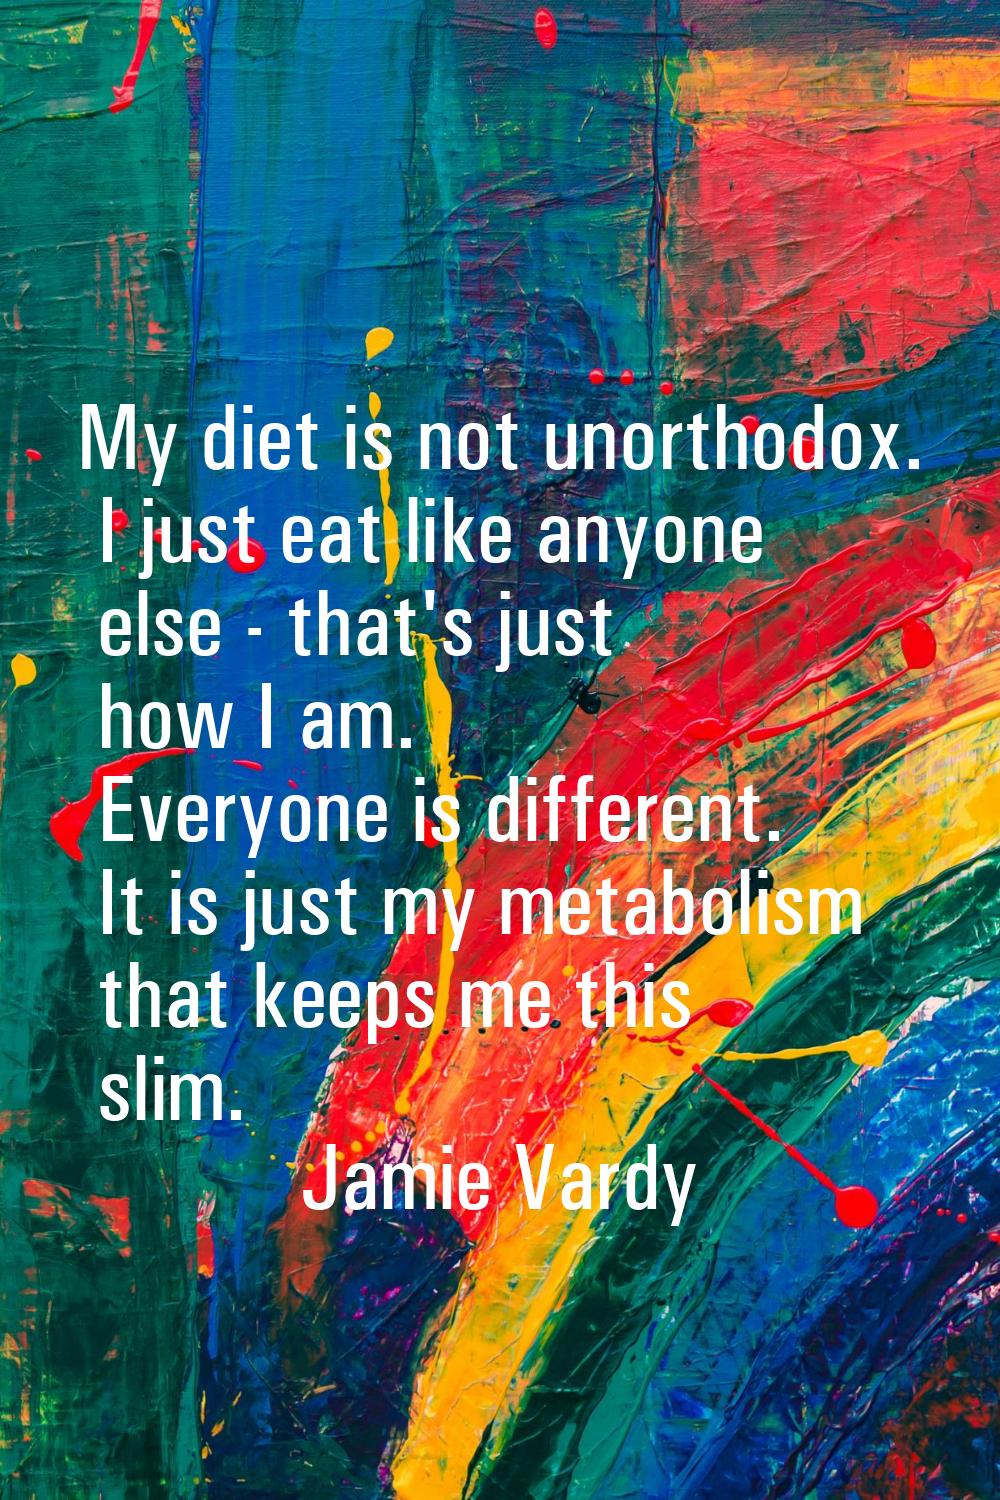 My diet is not unorthodox. I just eat like anyone else - that's just how I am. Everyone is differen